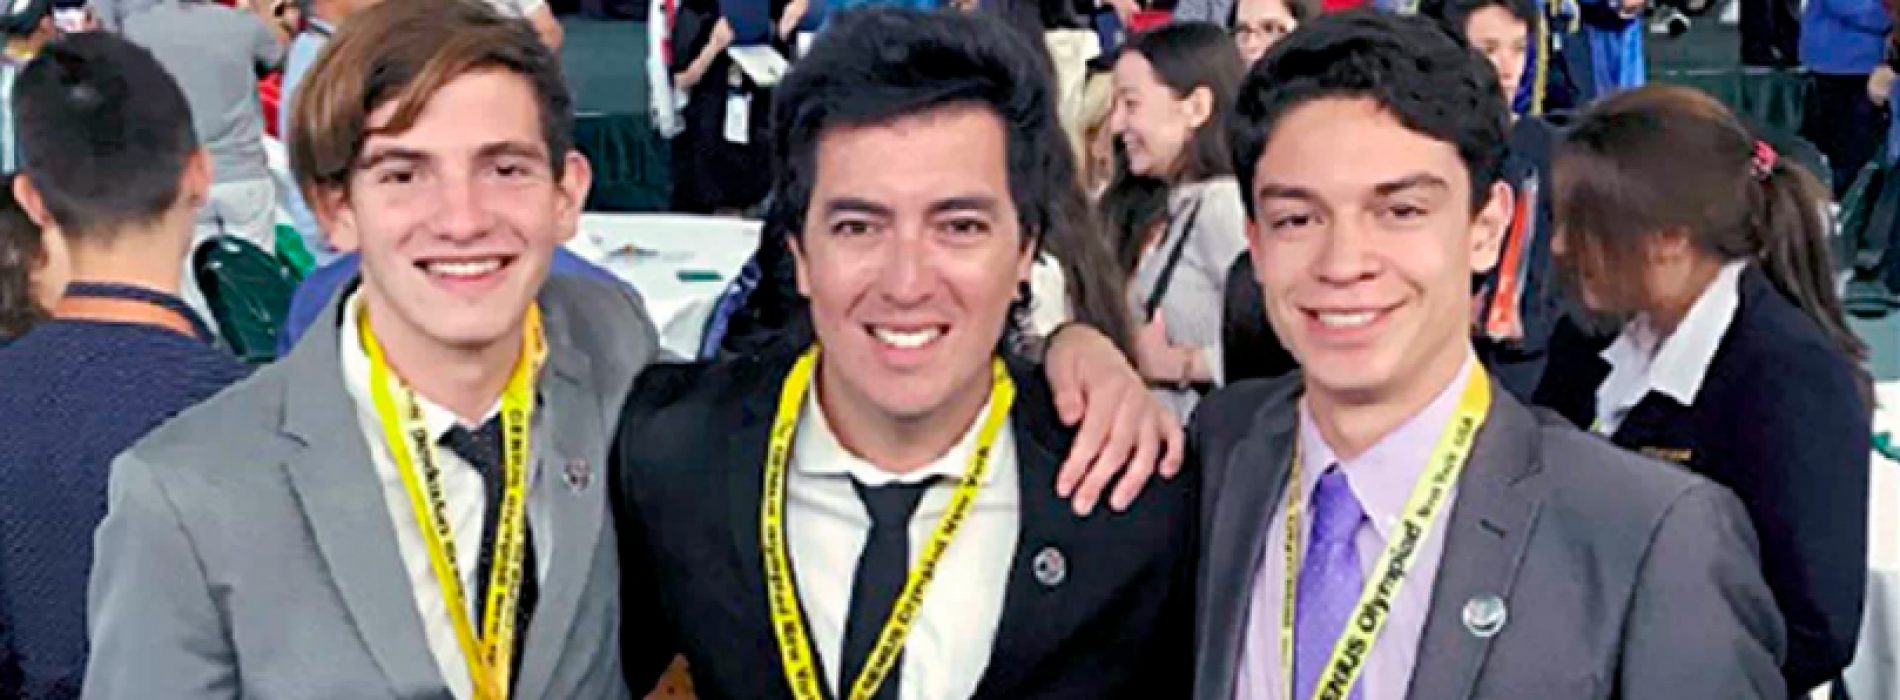 Chilean students won gold medal at the State University of New York